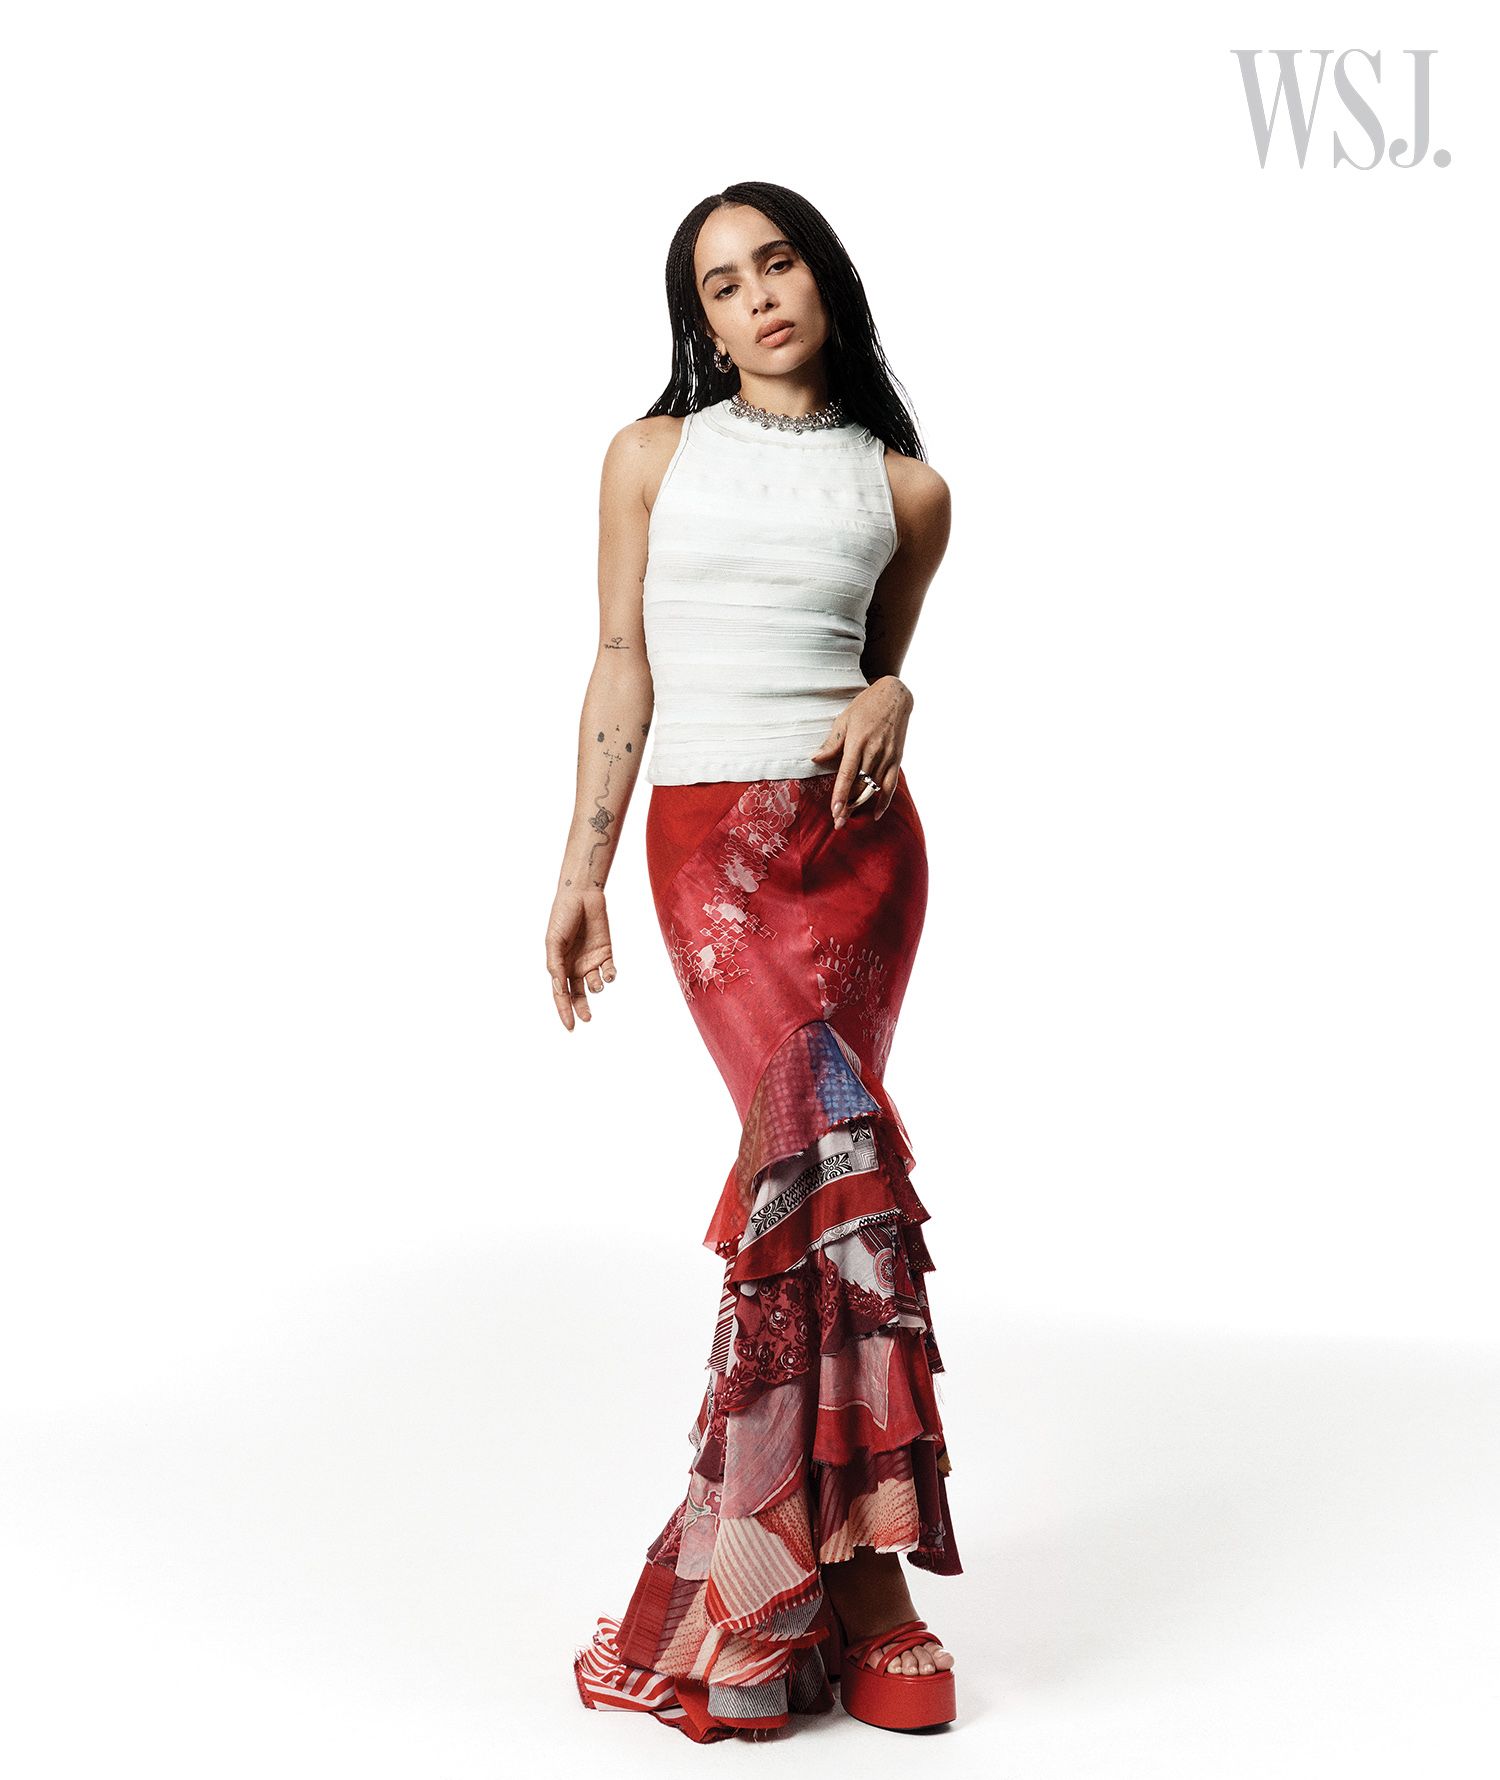 zoe-kravitz-poses-for-latest-interview-and-net-worth-style-rave